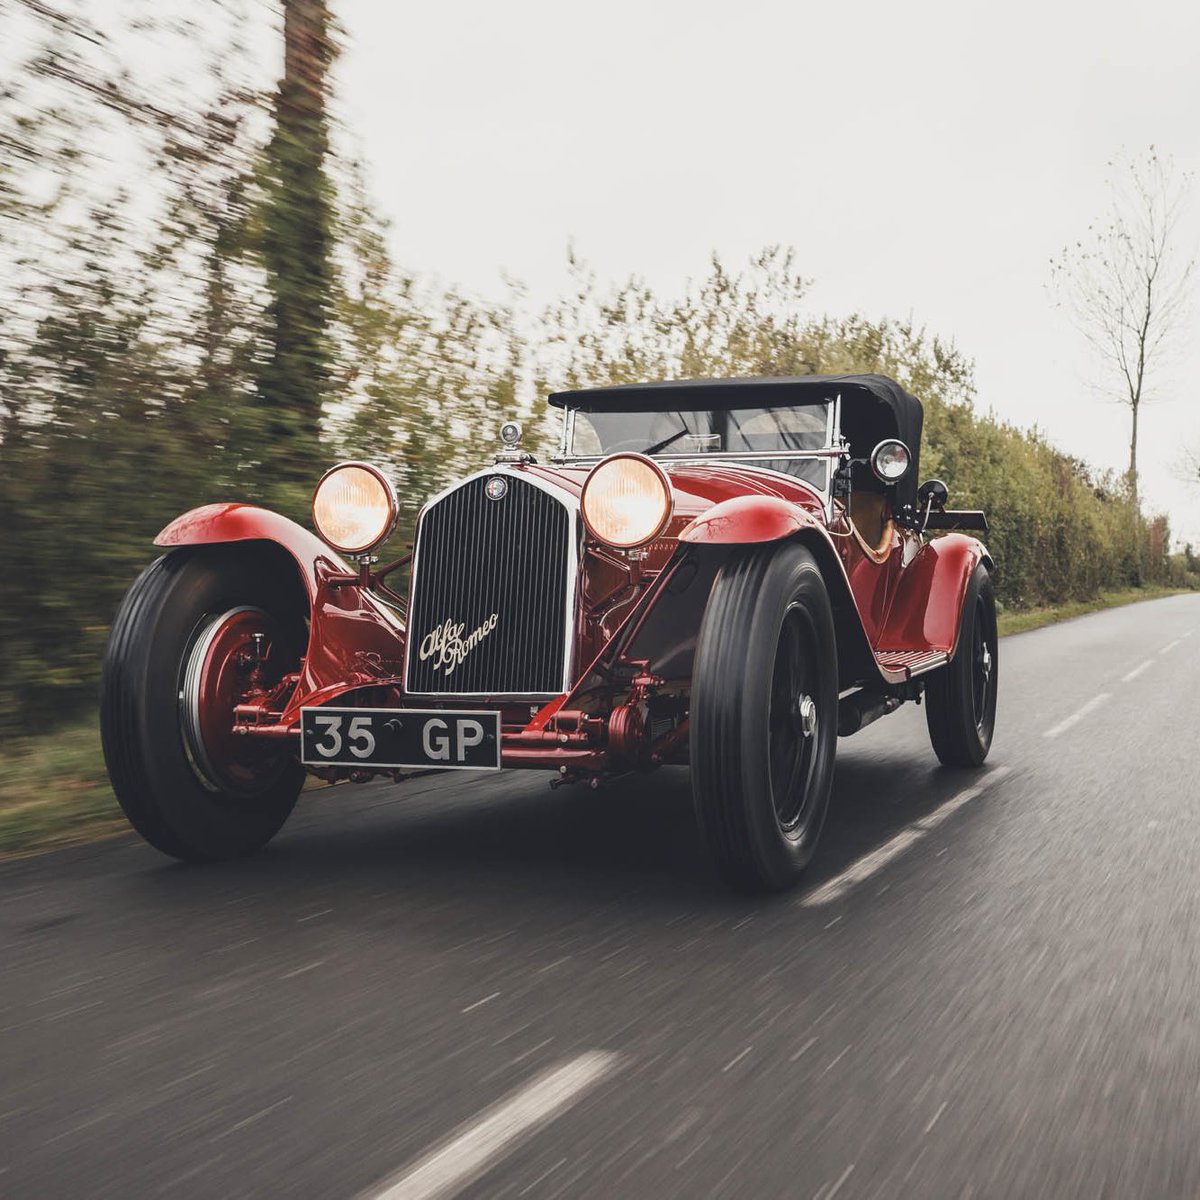 This Le Mans-winning Alfa Romeo 8C 2300 Zagato Spider appeared in the very first issue of Octane. More than 20 years on, Robert Coucher acquaints himself – and finally gets behind the wheel: bit.ly/Octane-250 📷 @amyshorephoto